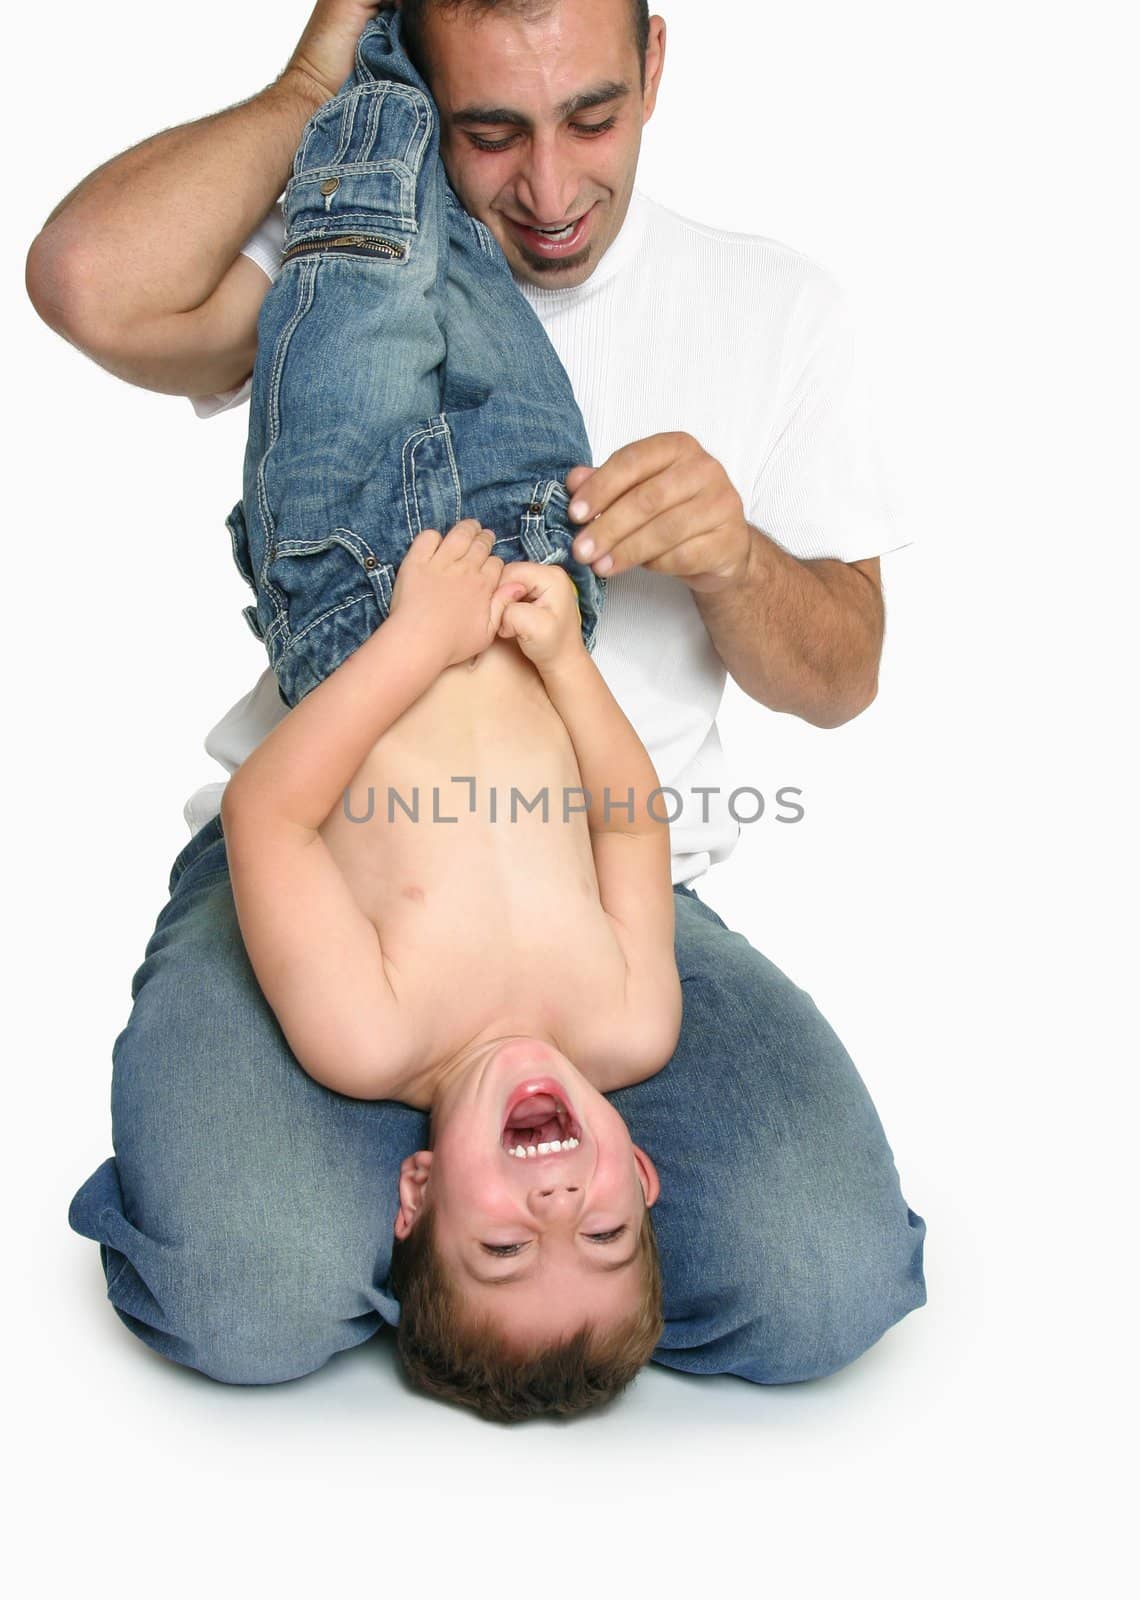 A child laughs gregariously playing with Dad